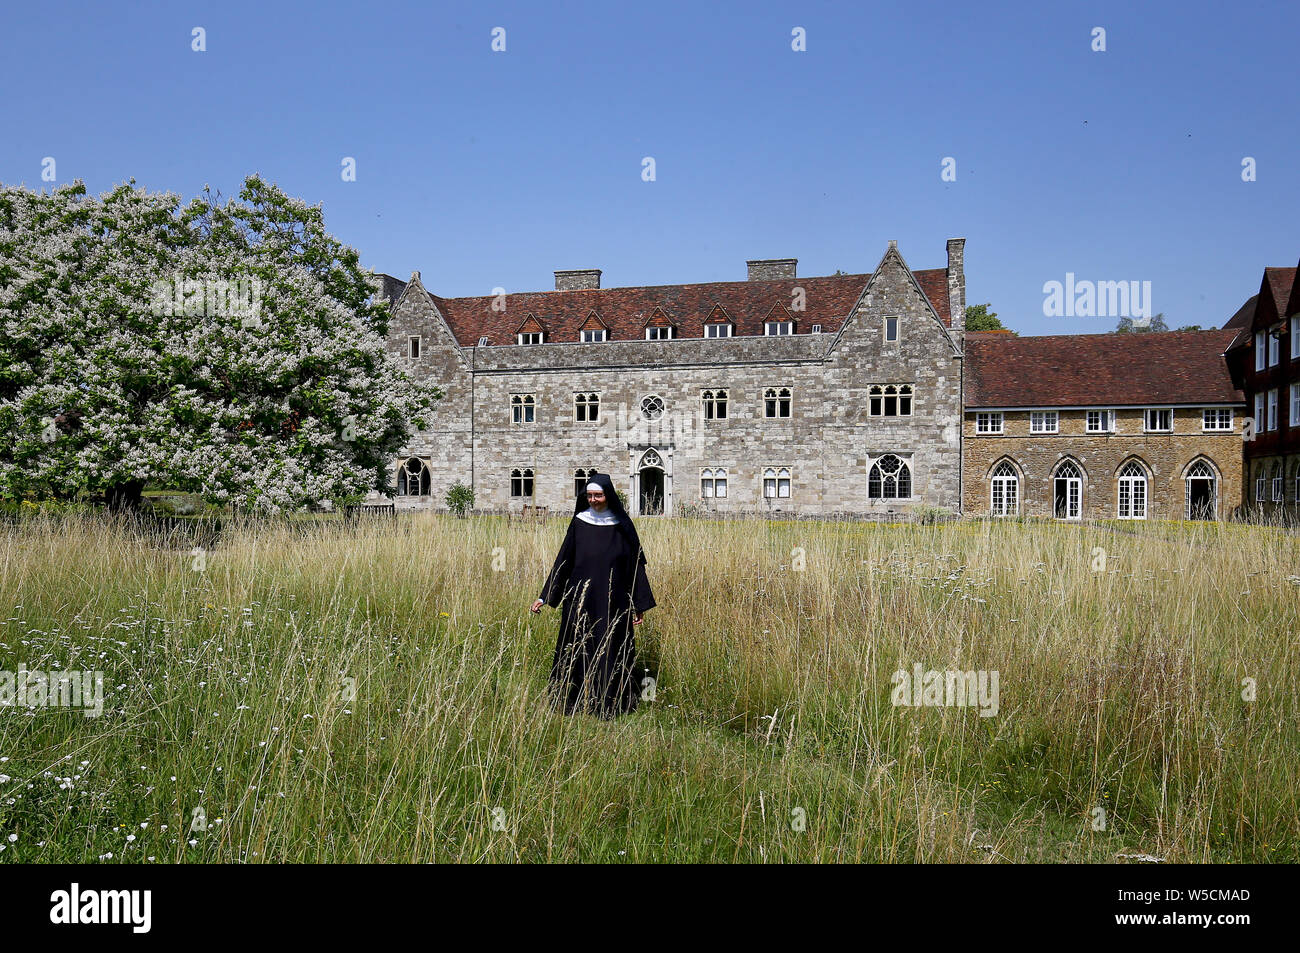 Mother Mary David enjoys the wild garden of St. Mary's Abbey, also known as Malling Abbey, in West Malling, Kent. The way of life of the community of nuns is under threat from proposals to build a housing estate next to their secluded ancient home, campaigners have claimed. Stock Photo